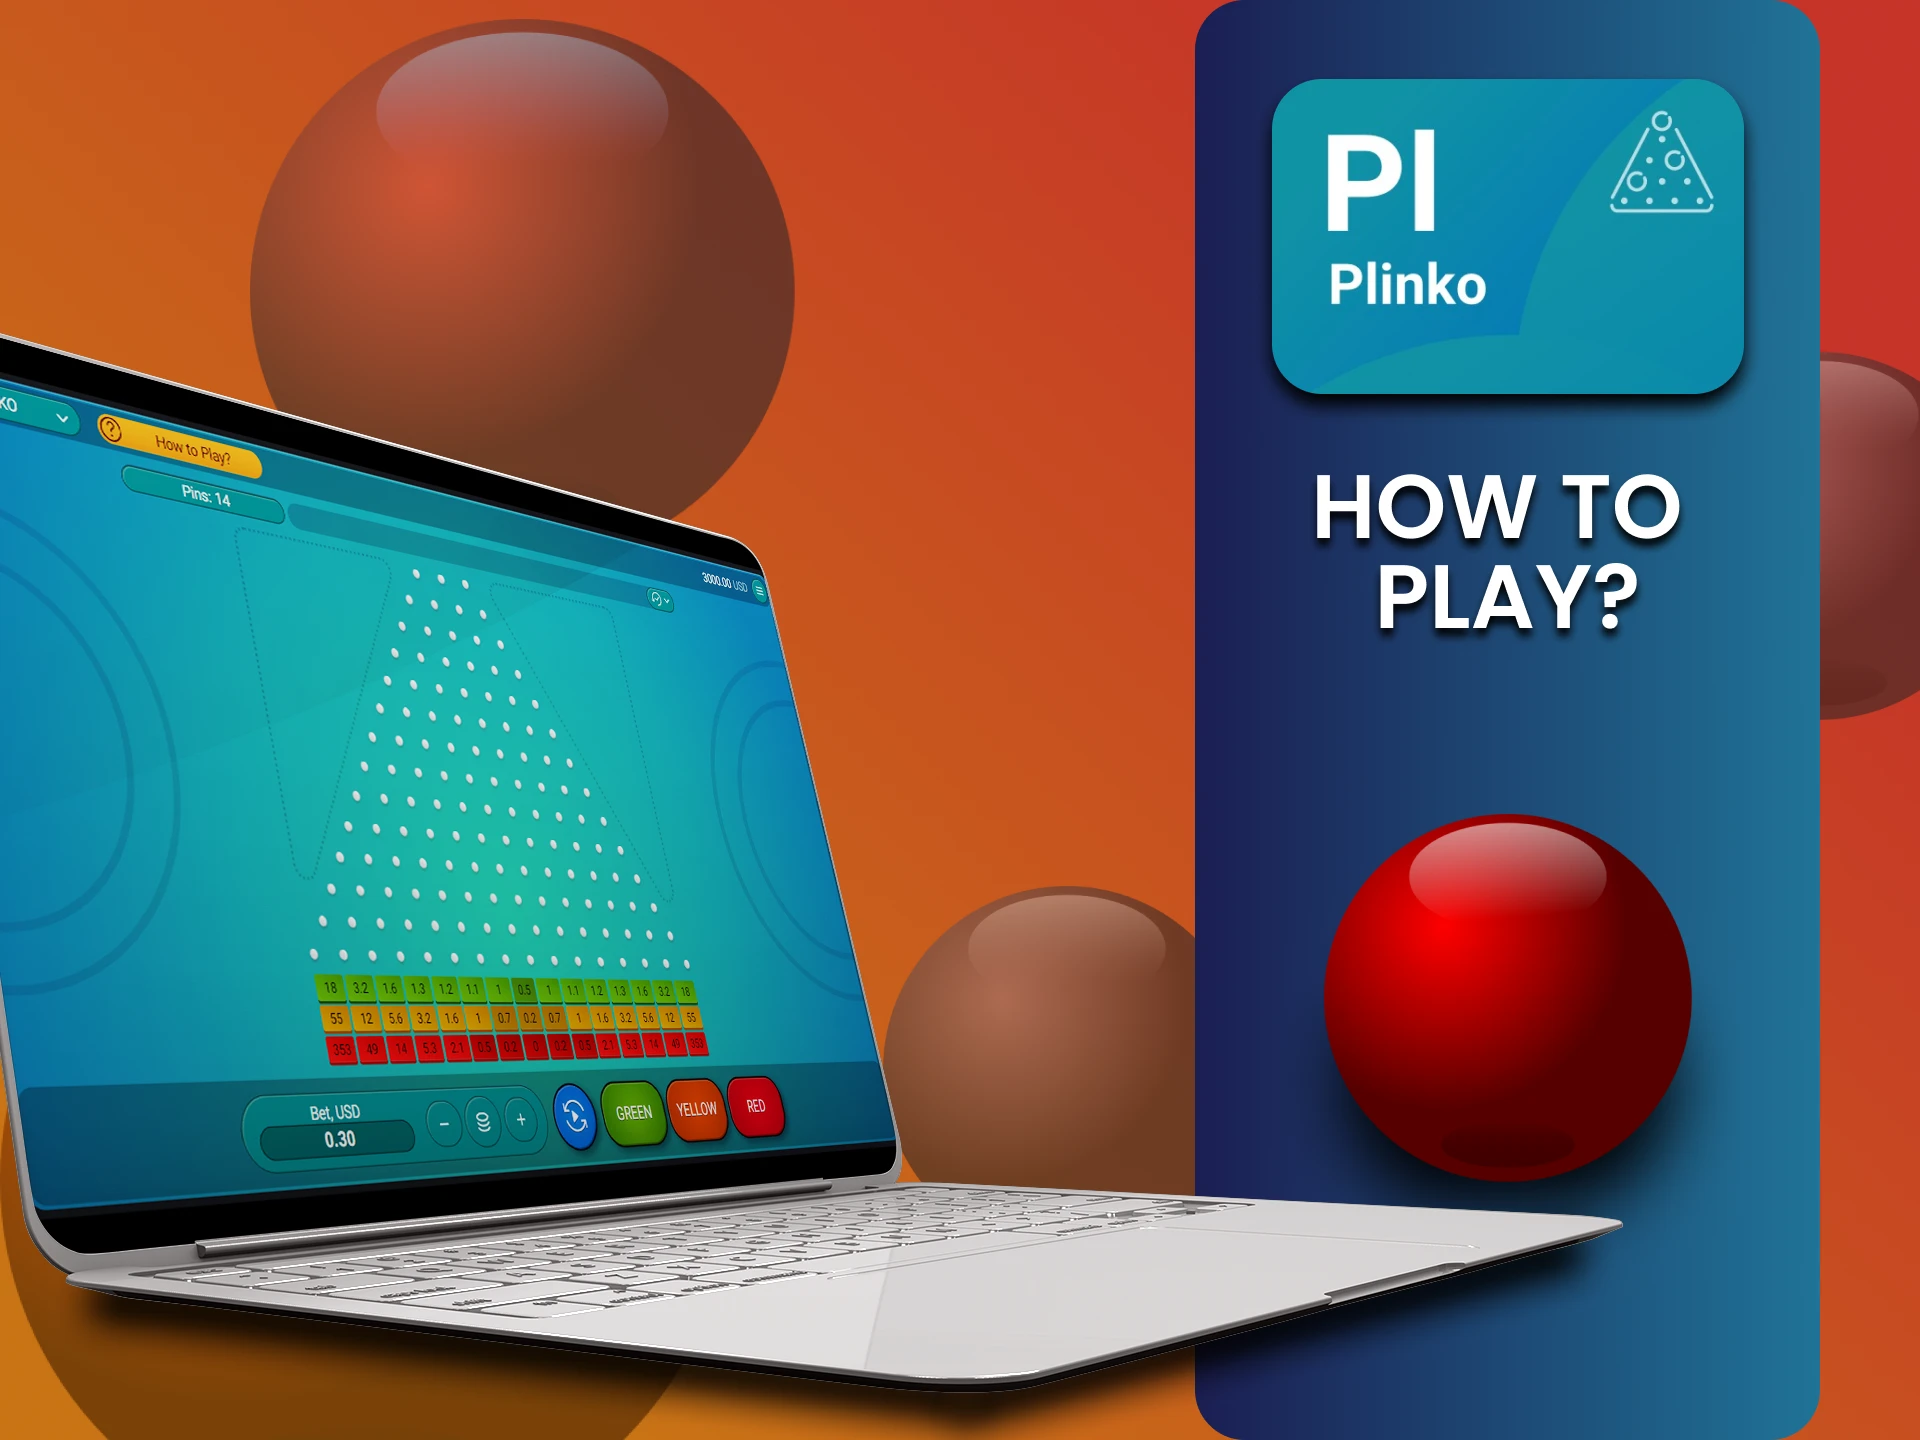 We will tell you how to play Plinko from Spribe.